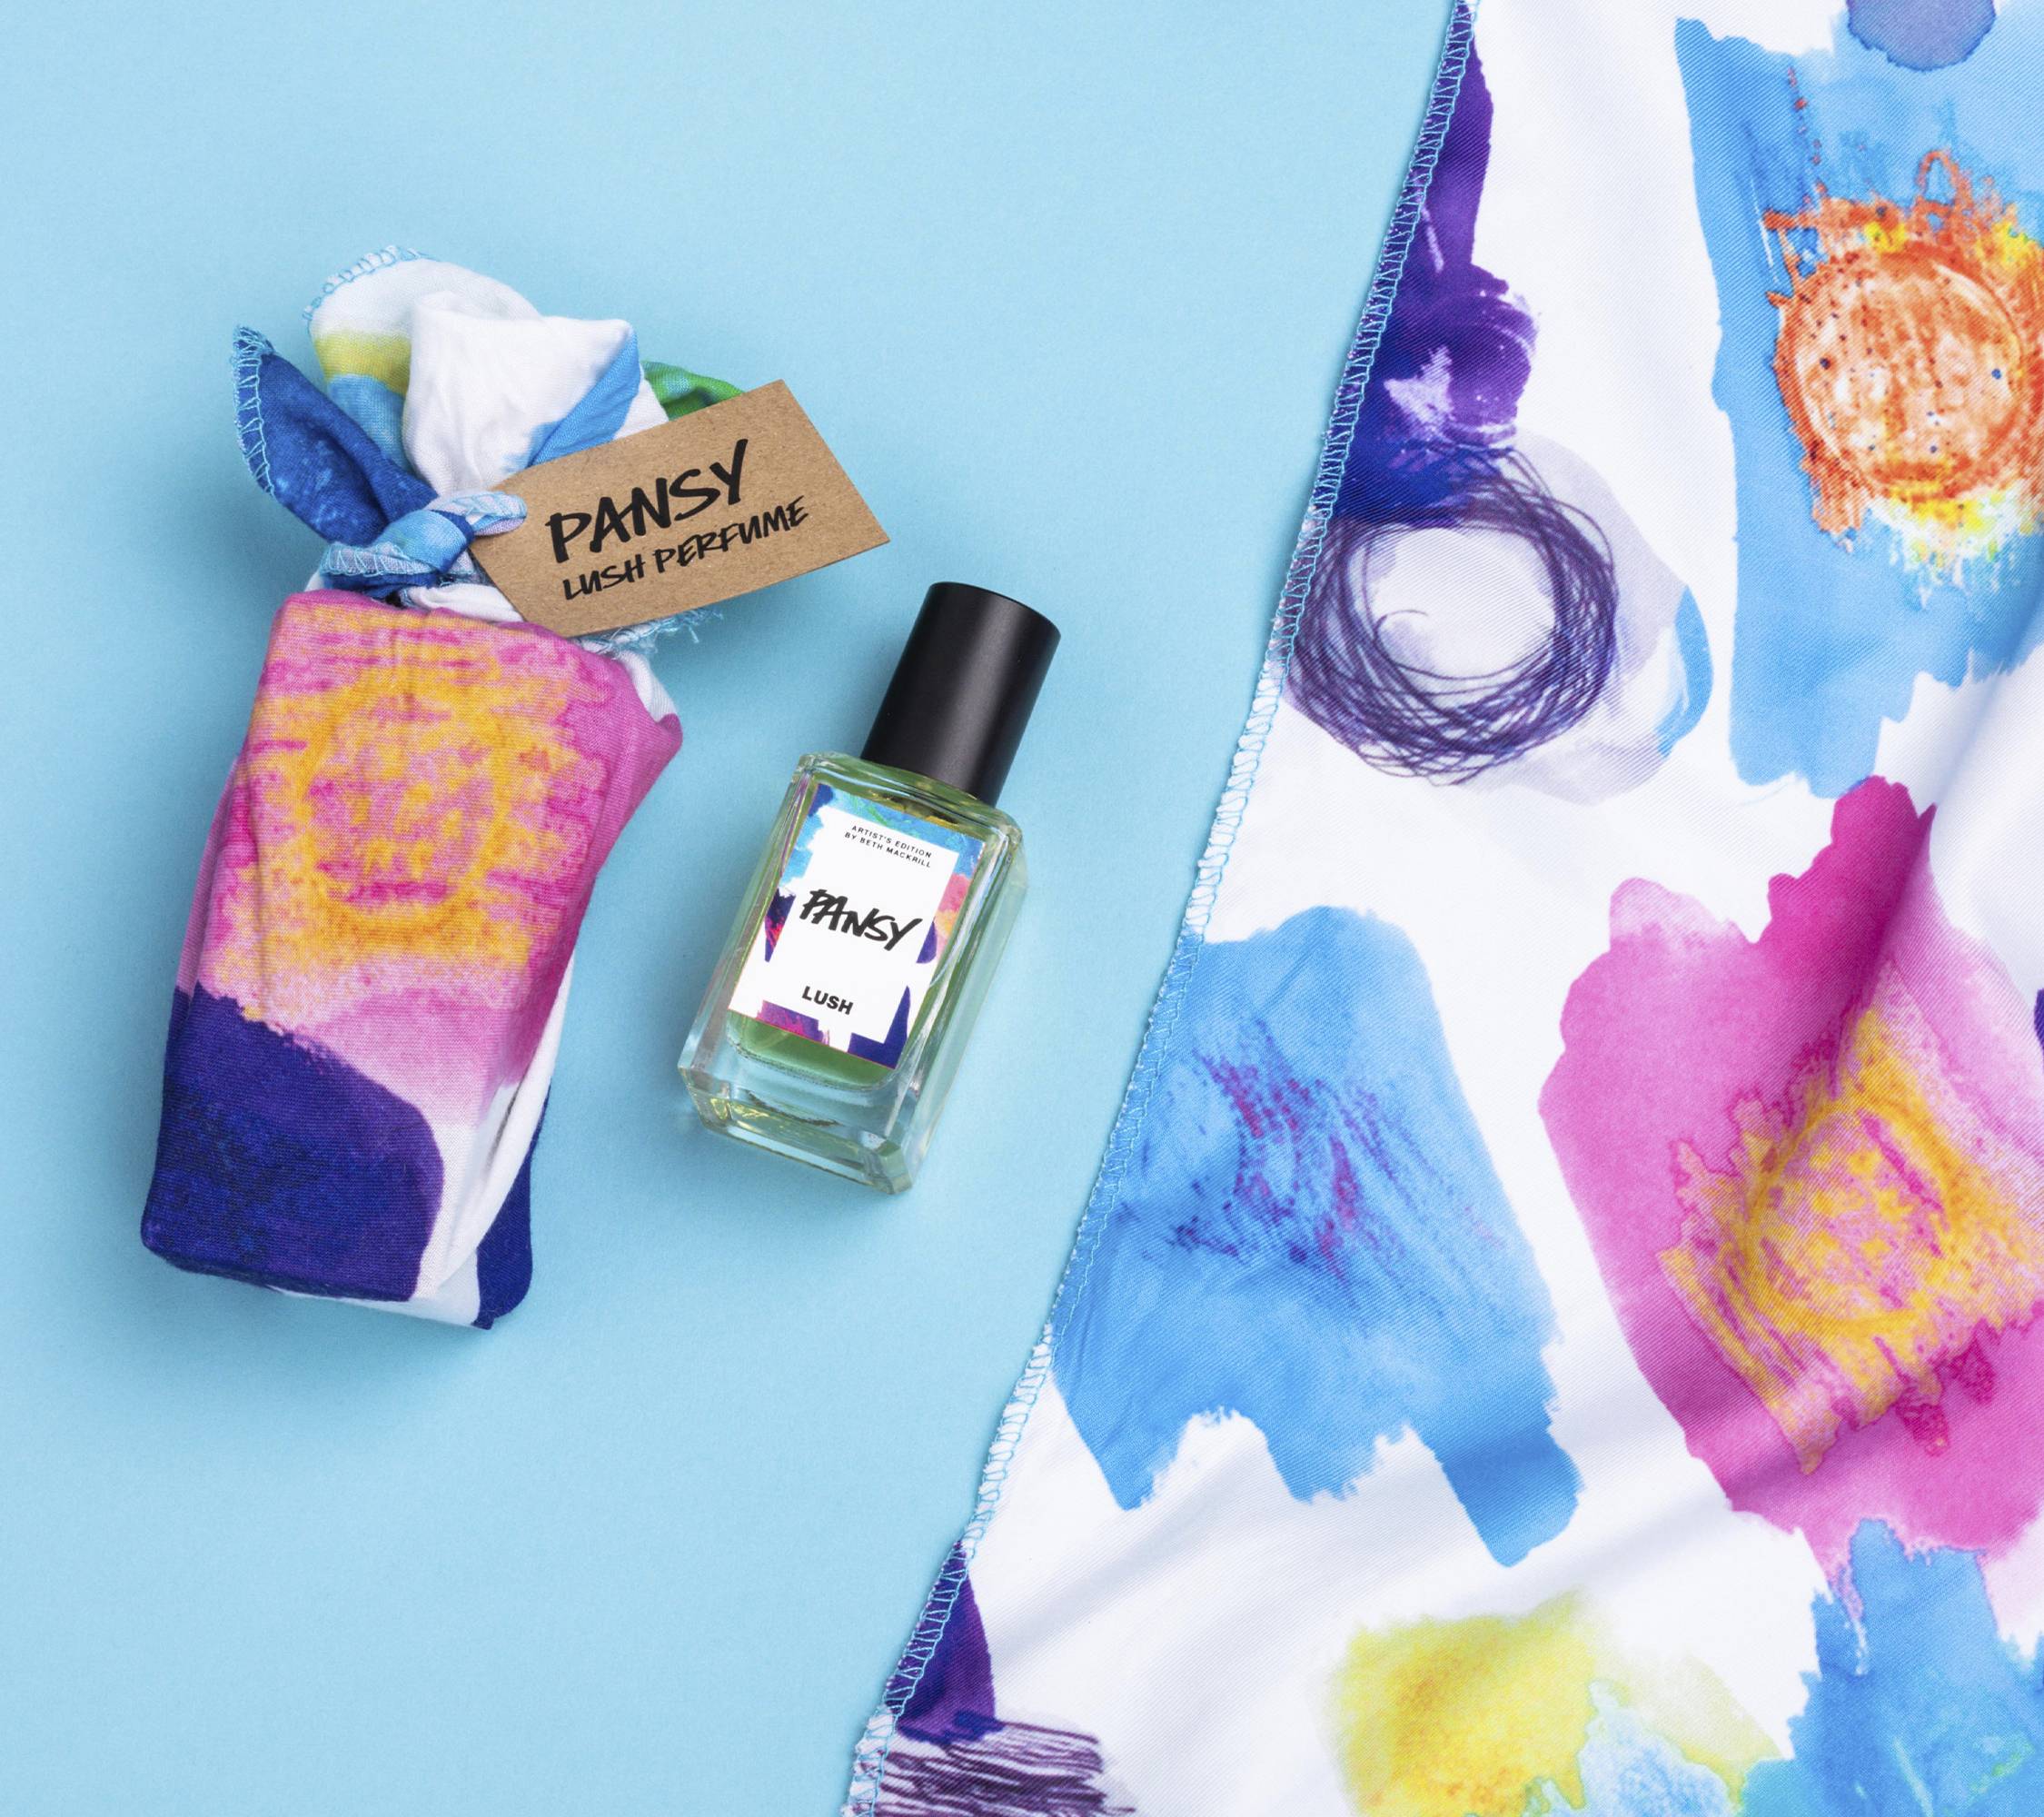 Pansy lies on a light blue background, alongside its two elements: a small bottle of Pansy perfume and a colourful knot wrap.